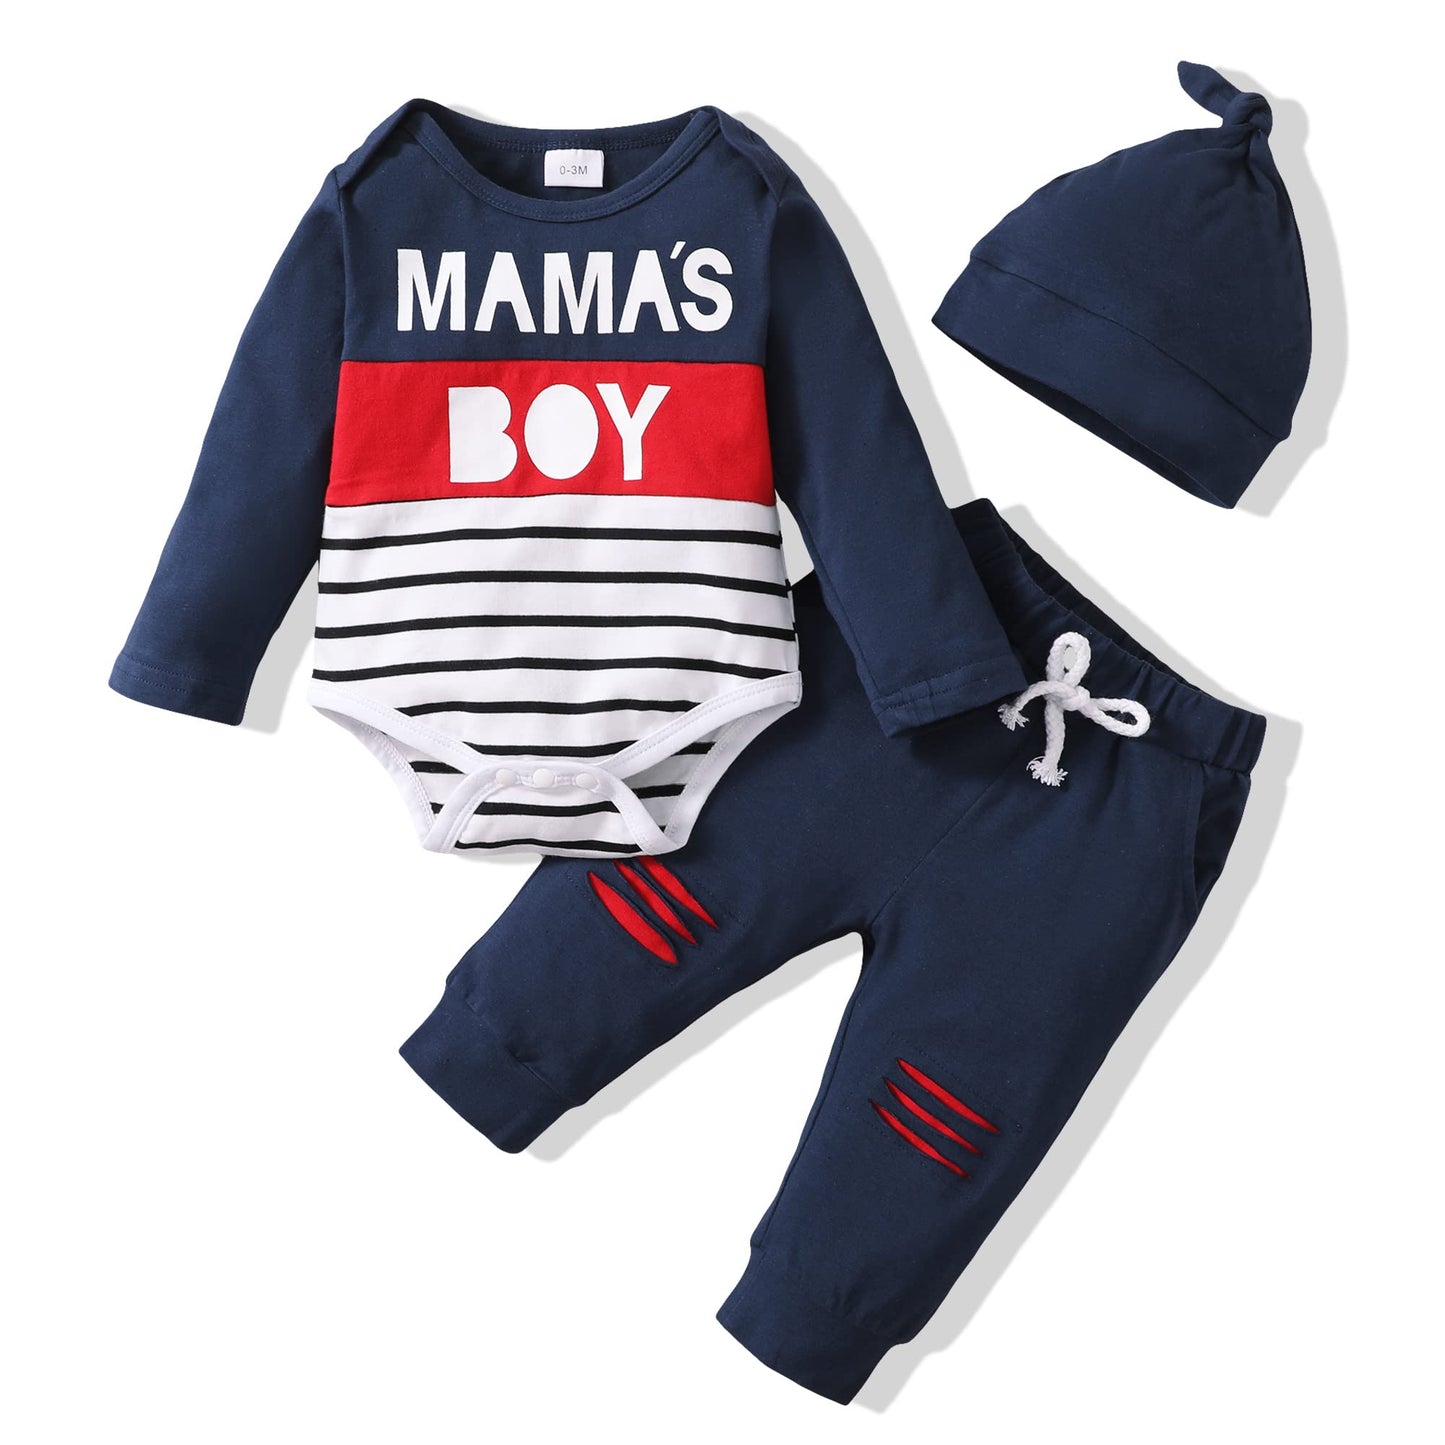 Newborn Baby Boy Clothes Outfits Winter Infant Boy Long Sleeve Romper Top Long Pants Outfits Set (0-3 Months)